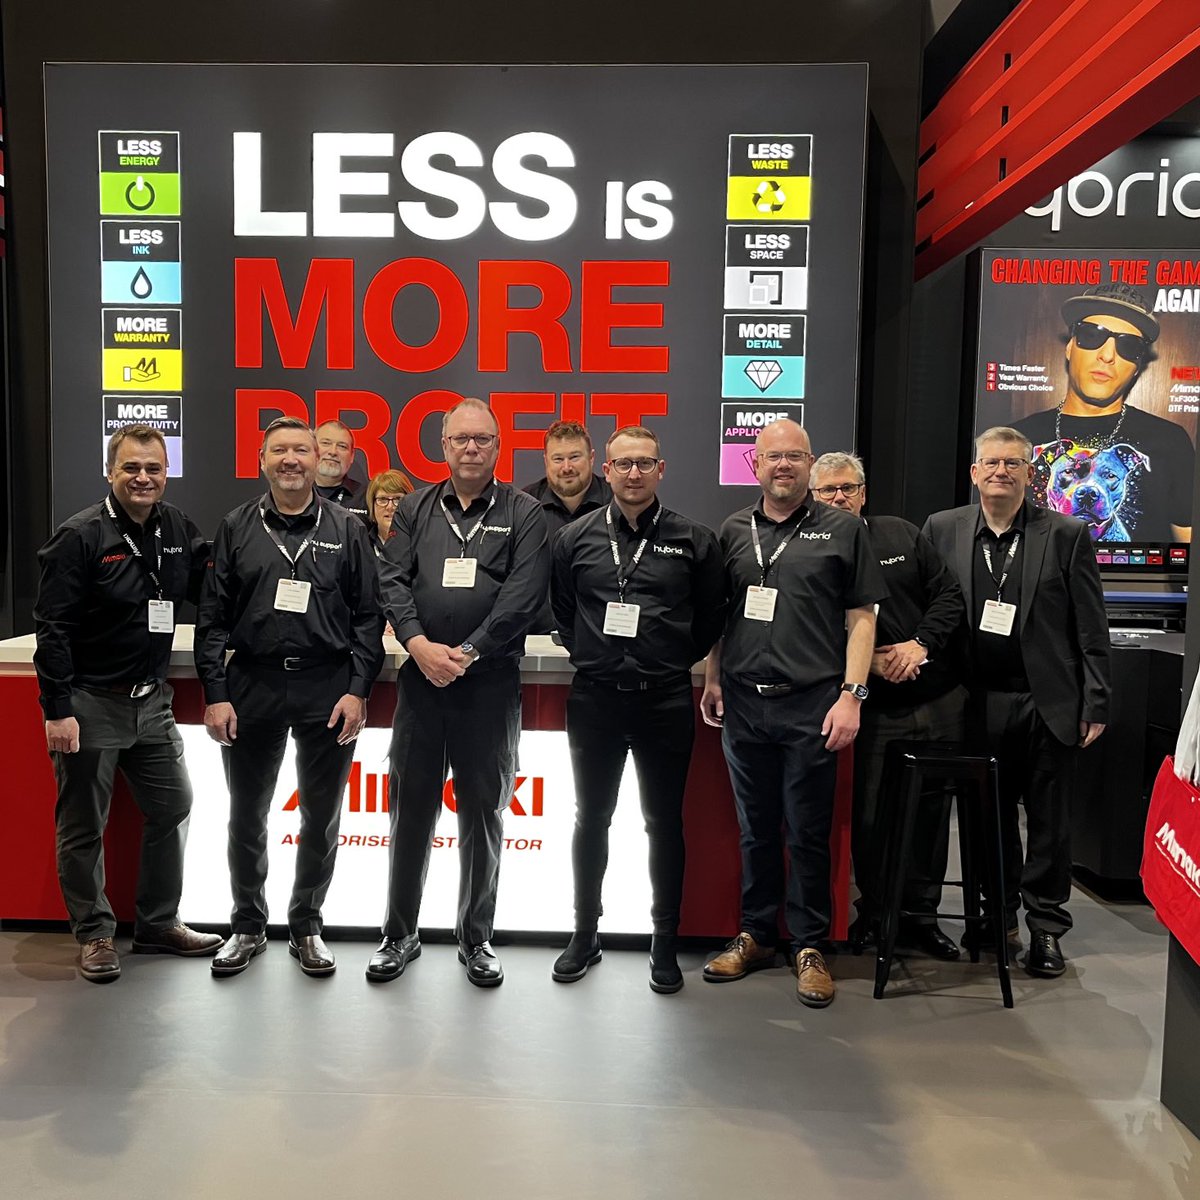 Join the Hybrid team today at ⁦@Signanddigital⁩ and find out how Less is More Profit with Mimaki’s latest technology. We’re looking forward to seeing you at the show. #sduk